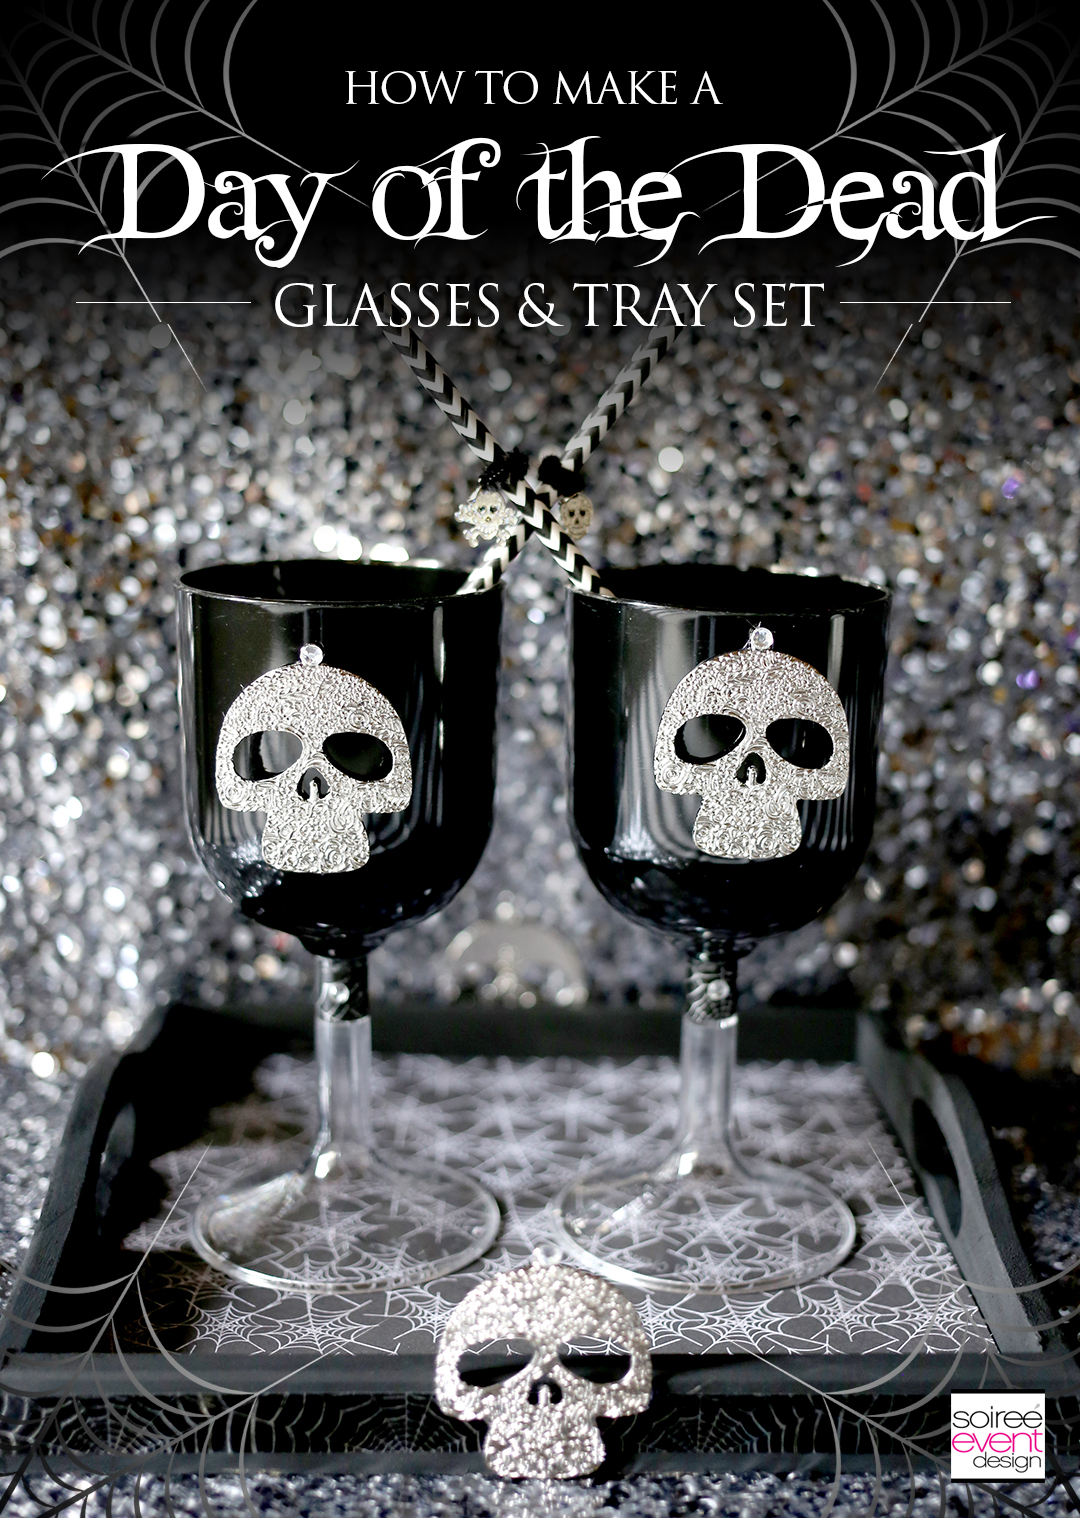 diy-day-of-the-dead-decorations-glasses-and-tray